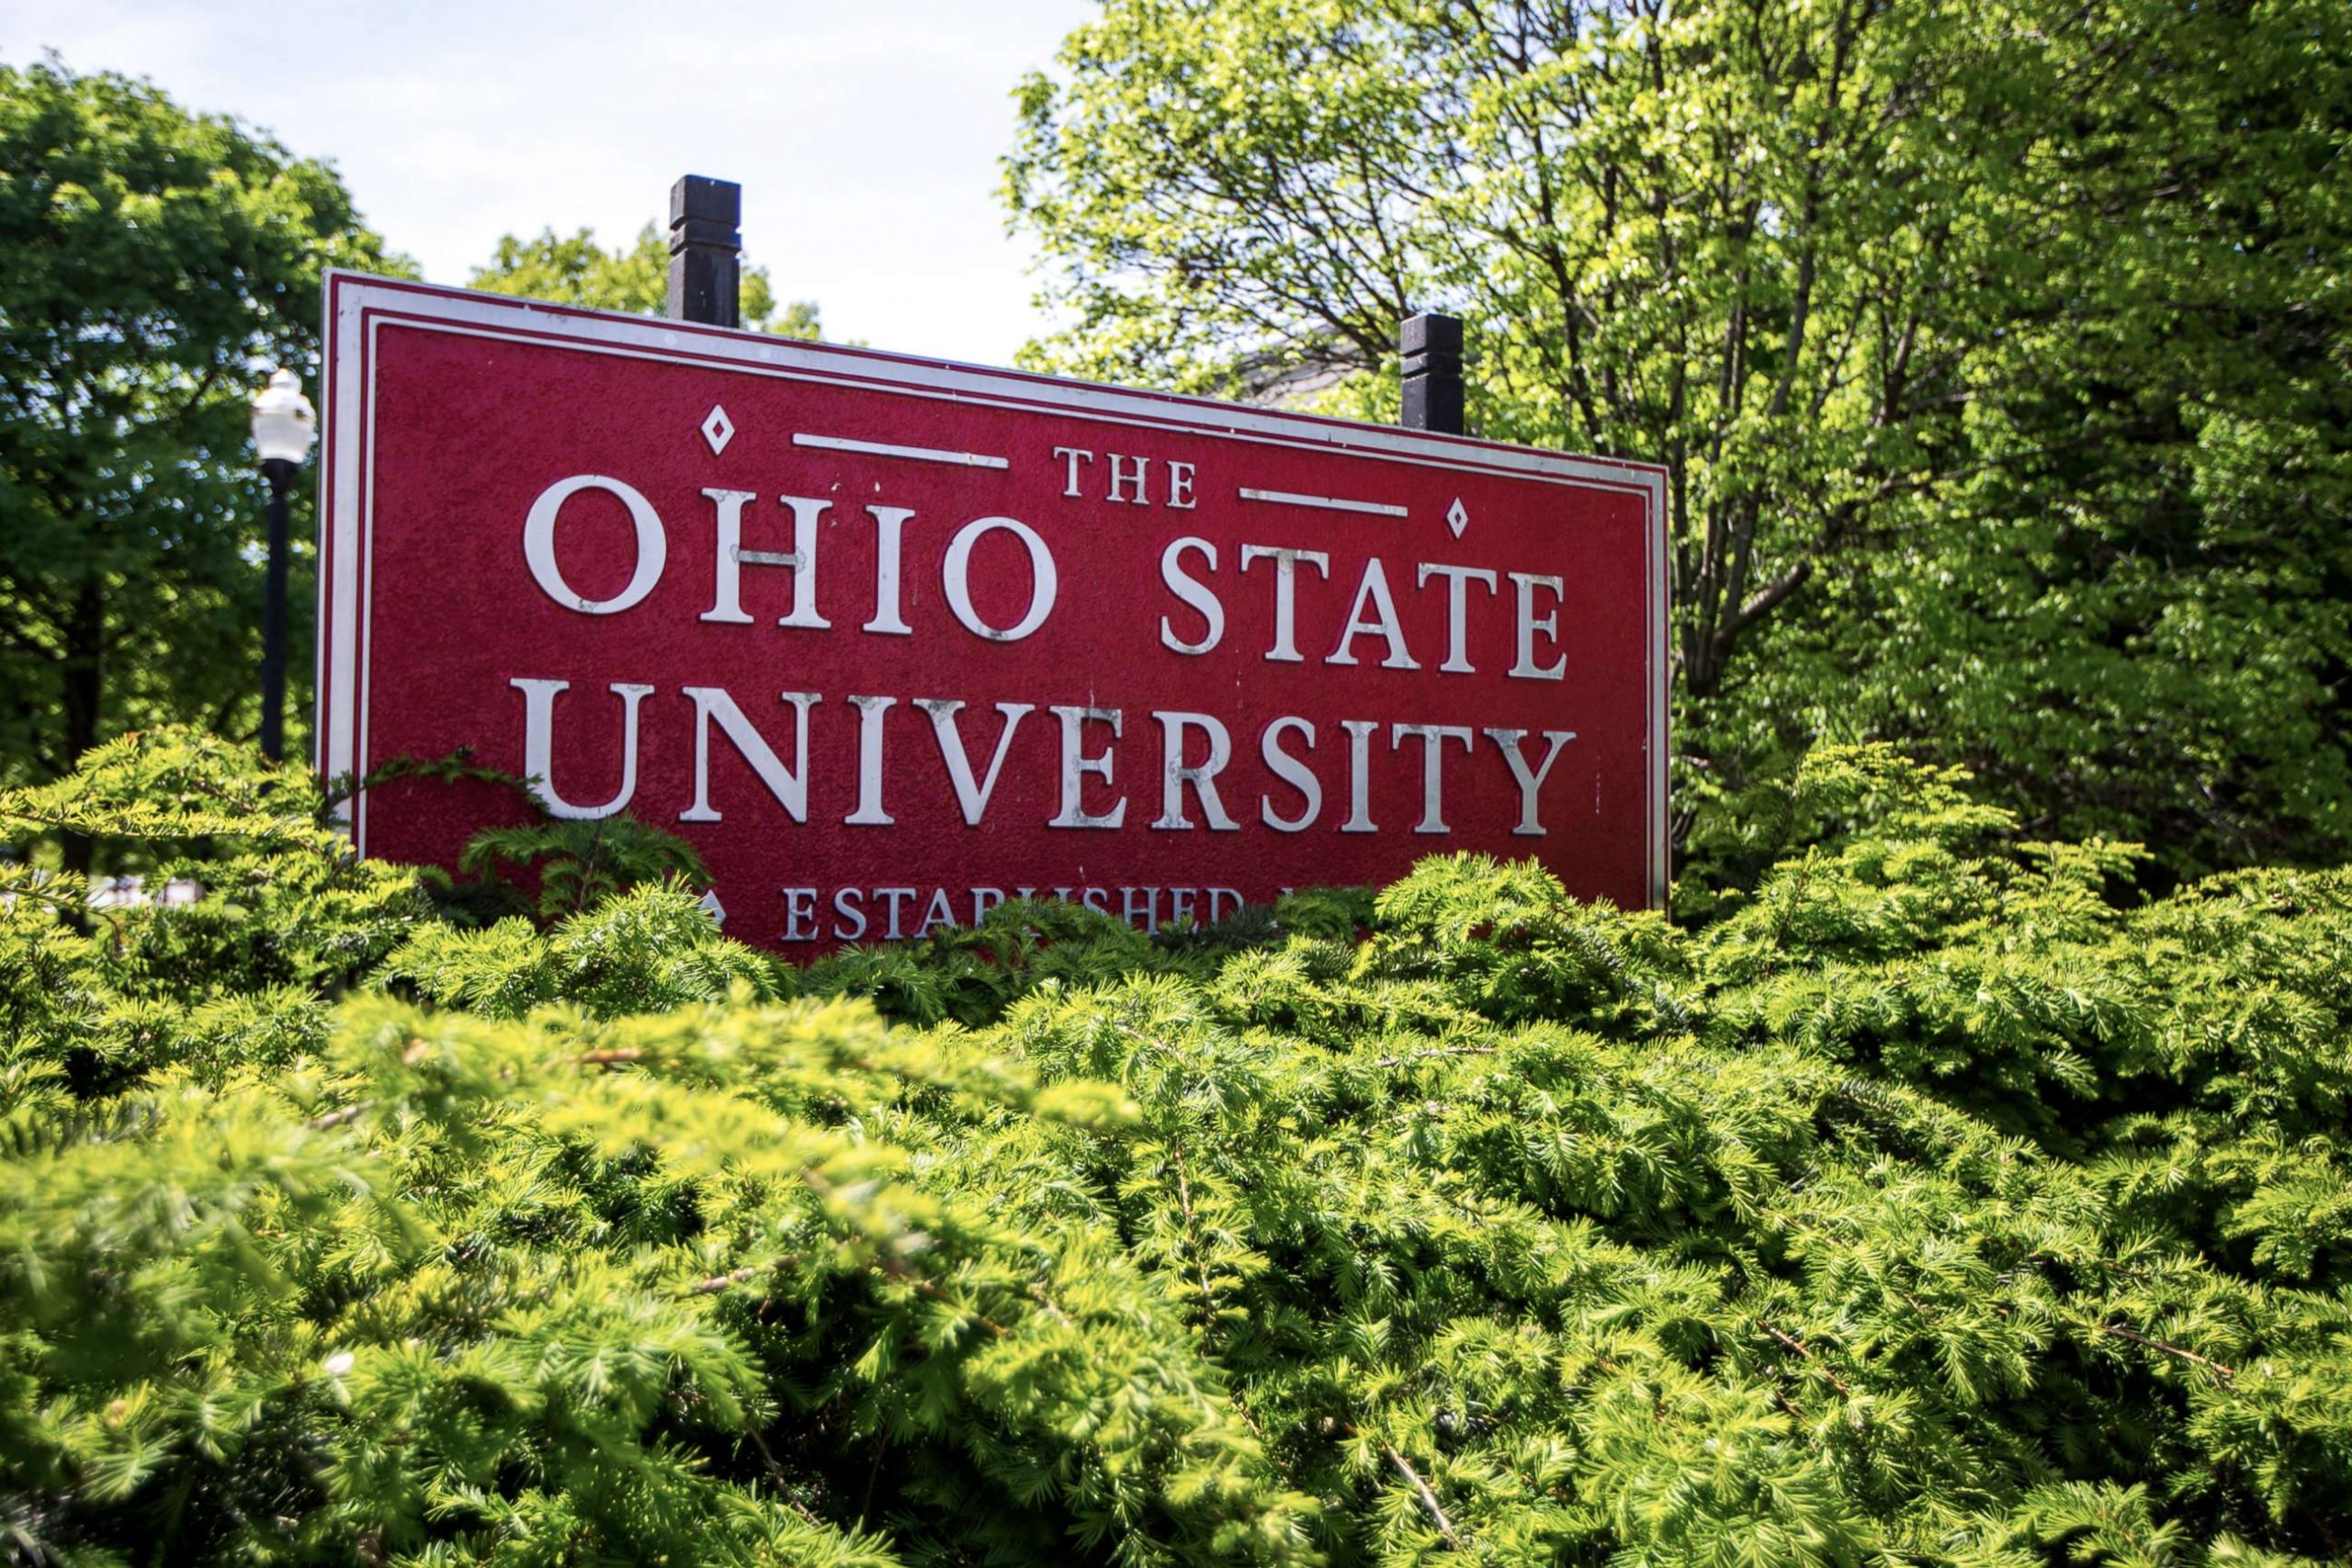 Ohio State reports 2 antisemitic incidents against students in 24 hours